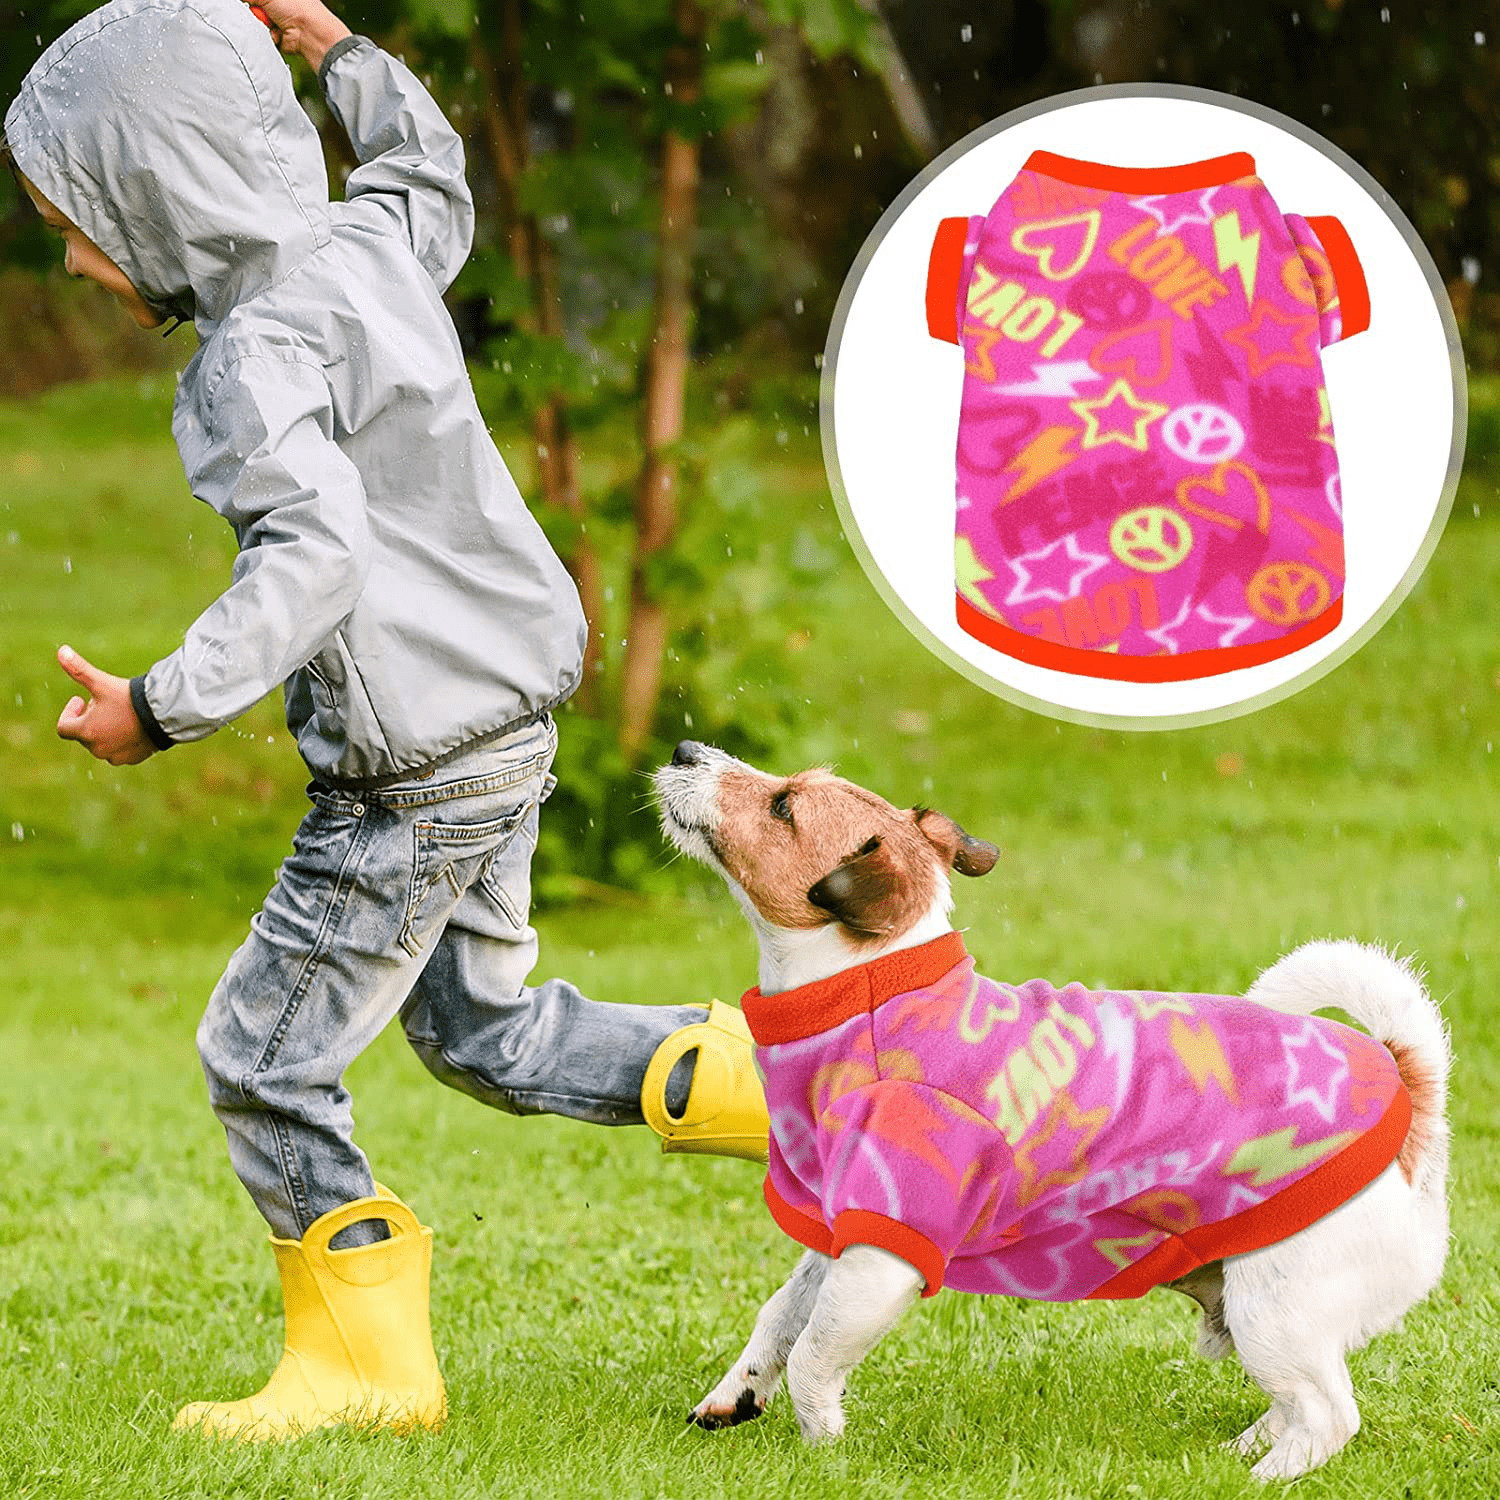 7 Pieces Dog Fleece Sweaters Dog Warm Sweater Dog Sweatshirt Winter Dog Outfits Soft Fleece Puppy Sweater Dog Outfits for Chihuahua Yorkshire Poodle Pets Pup Dog Cat Animals & Pet Supplies > Pet Supplies > Dog Supplies > Dog Apparel Xuniea   